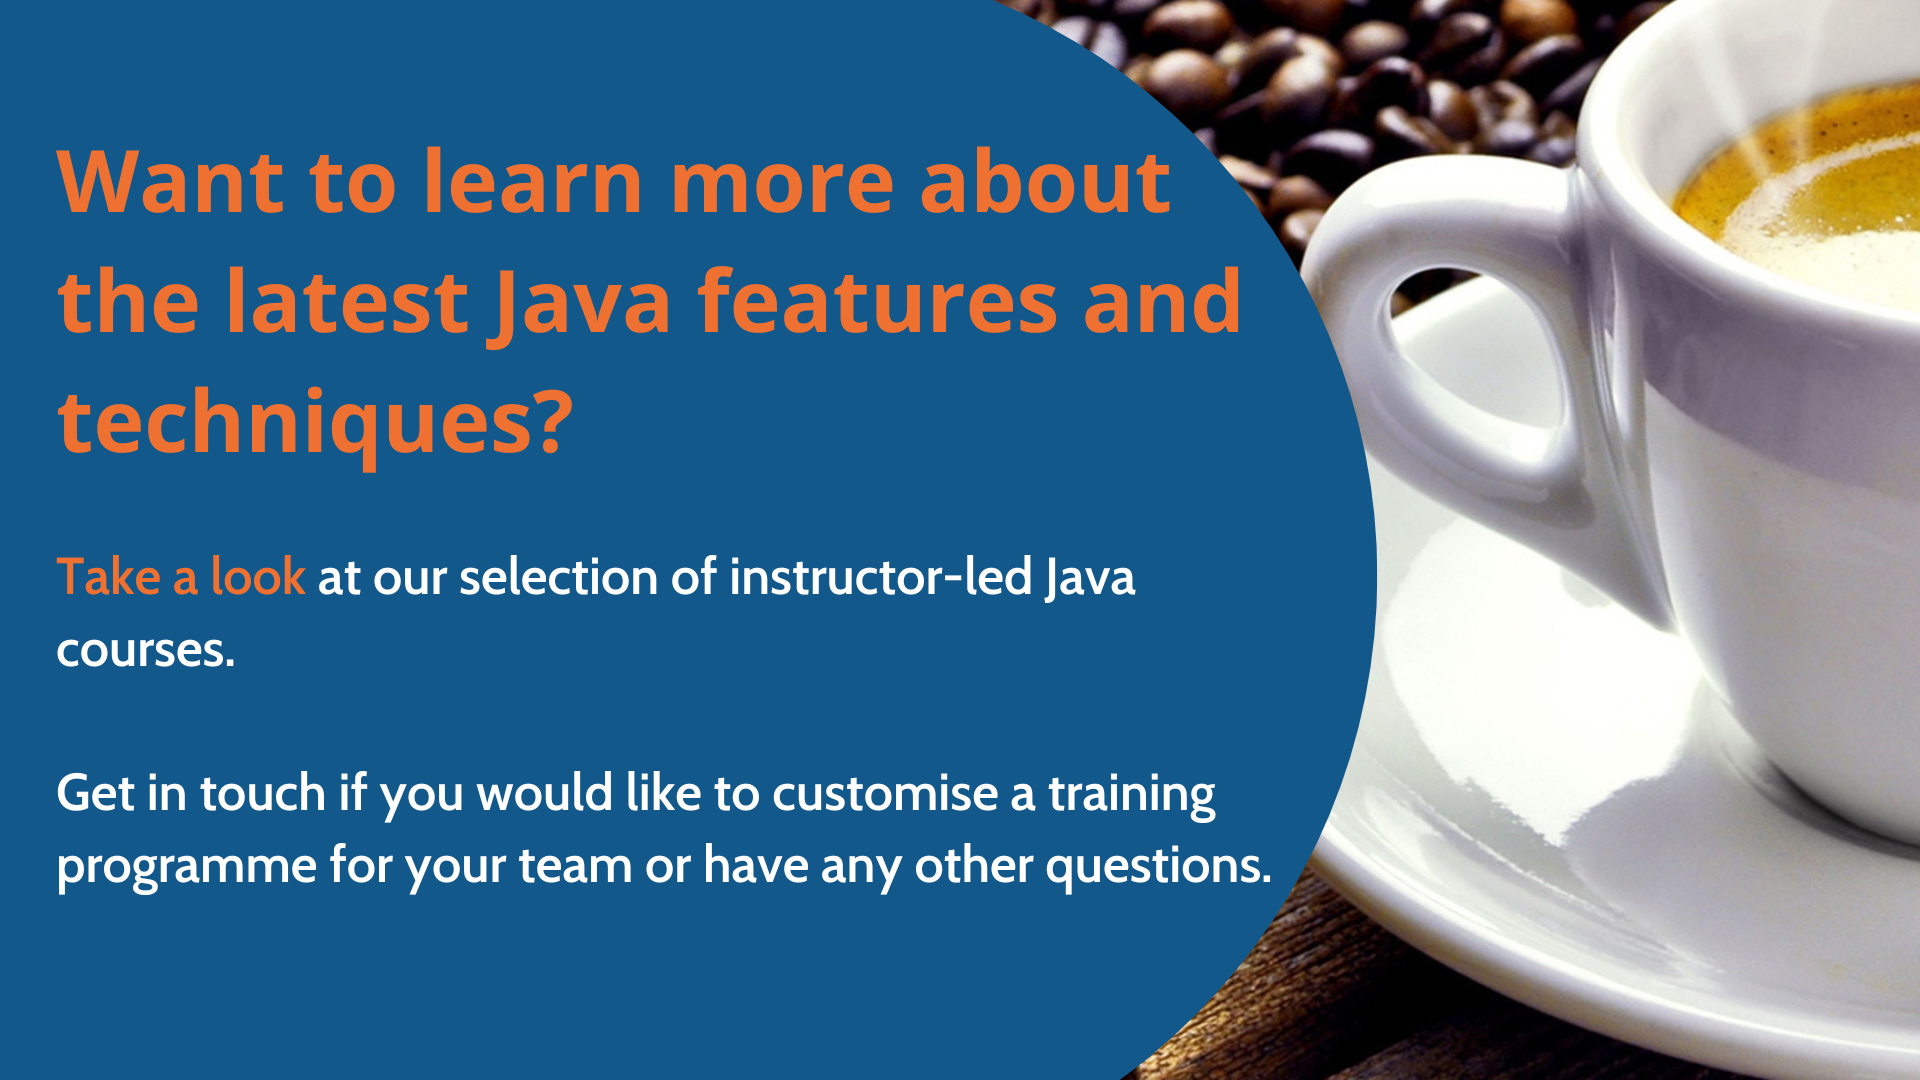 Why is Java 8 more popular than Java 14?